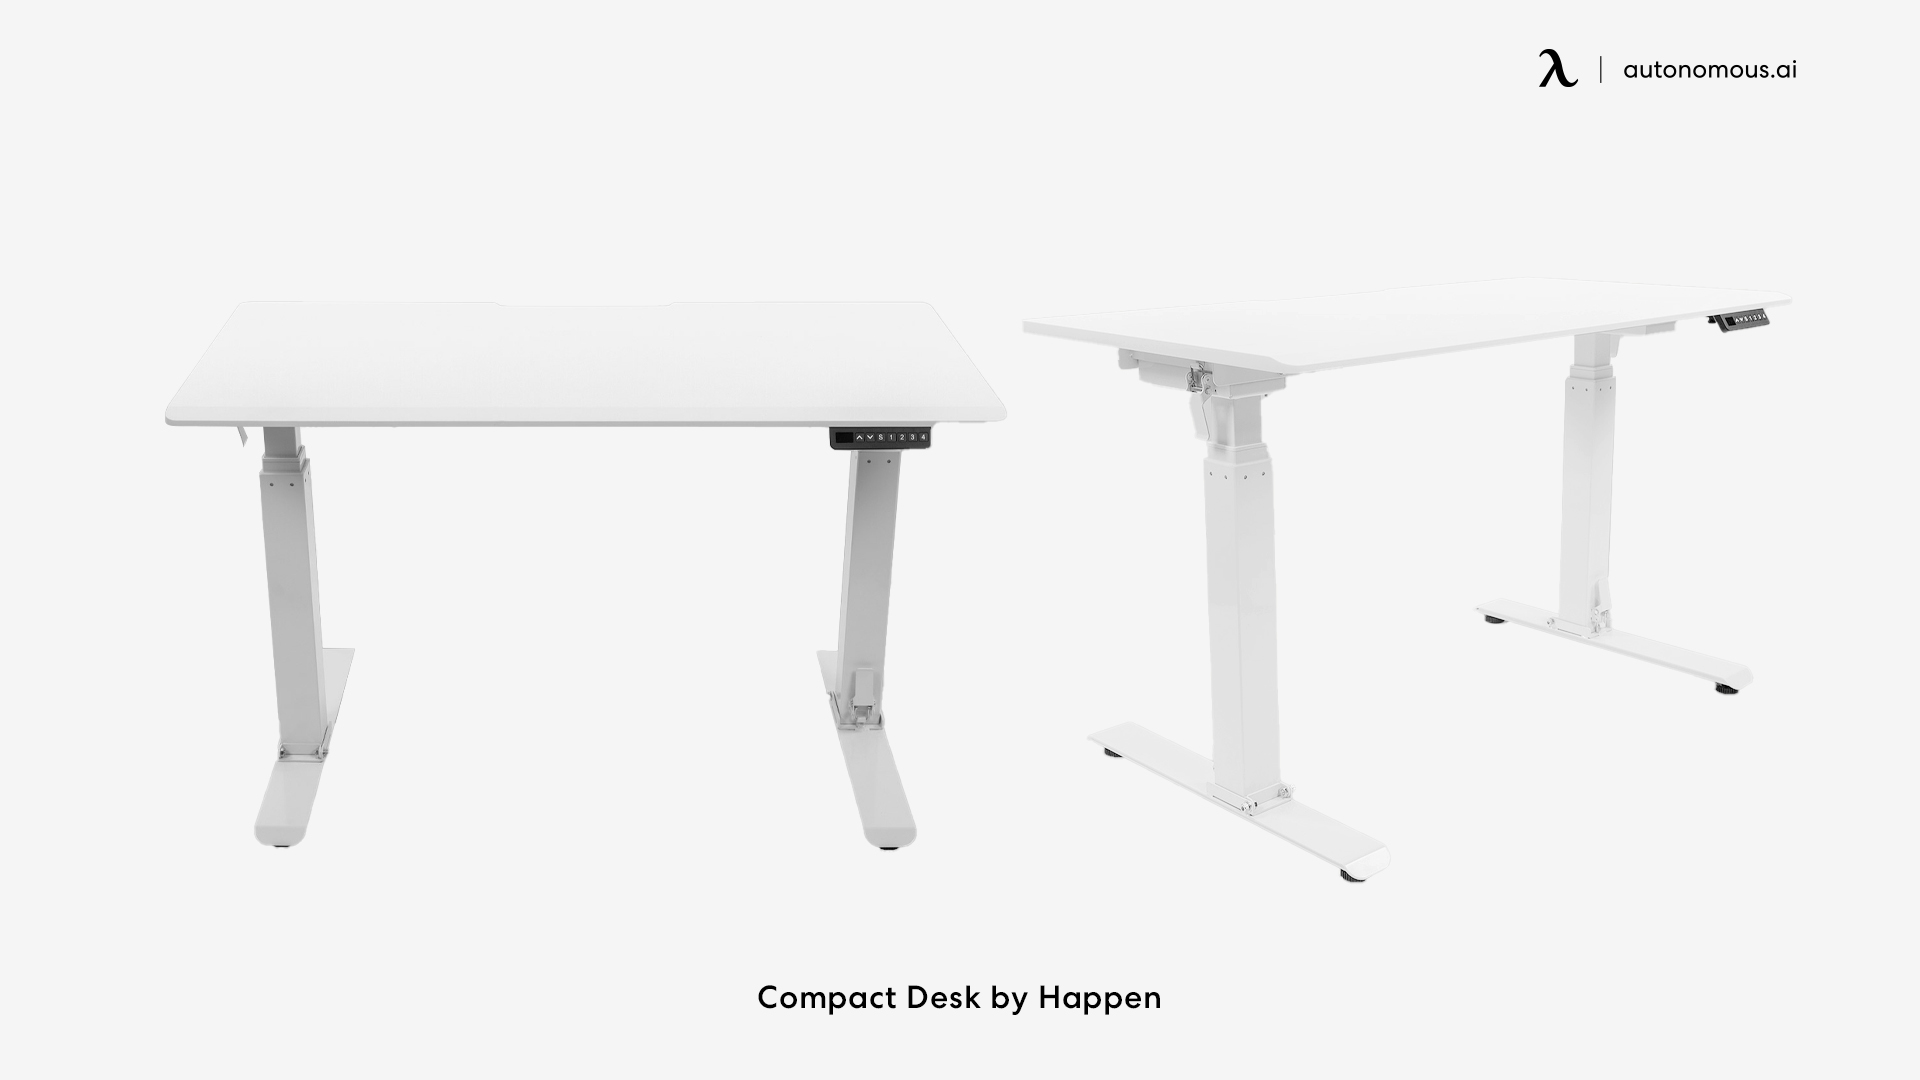 Compact Desk: Adjustable Small Desk for Saving Space